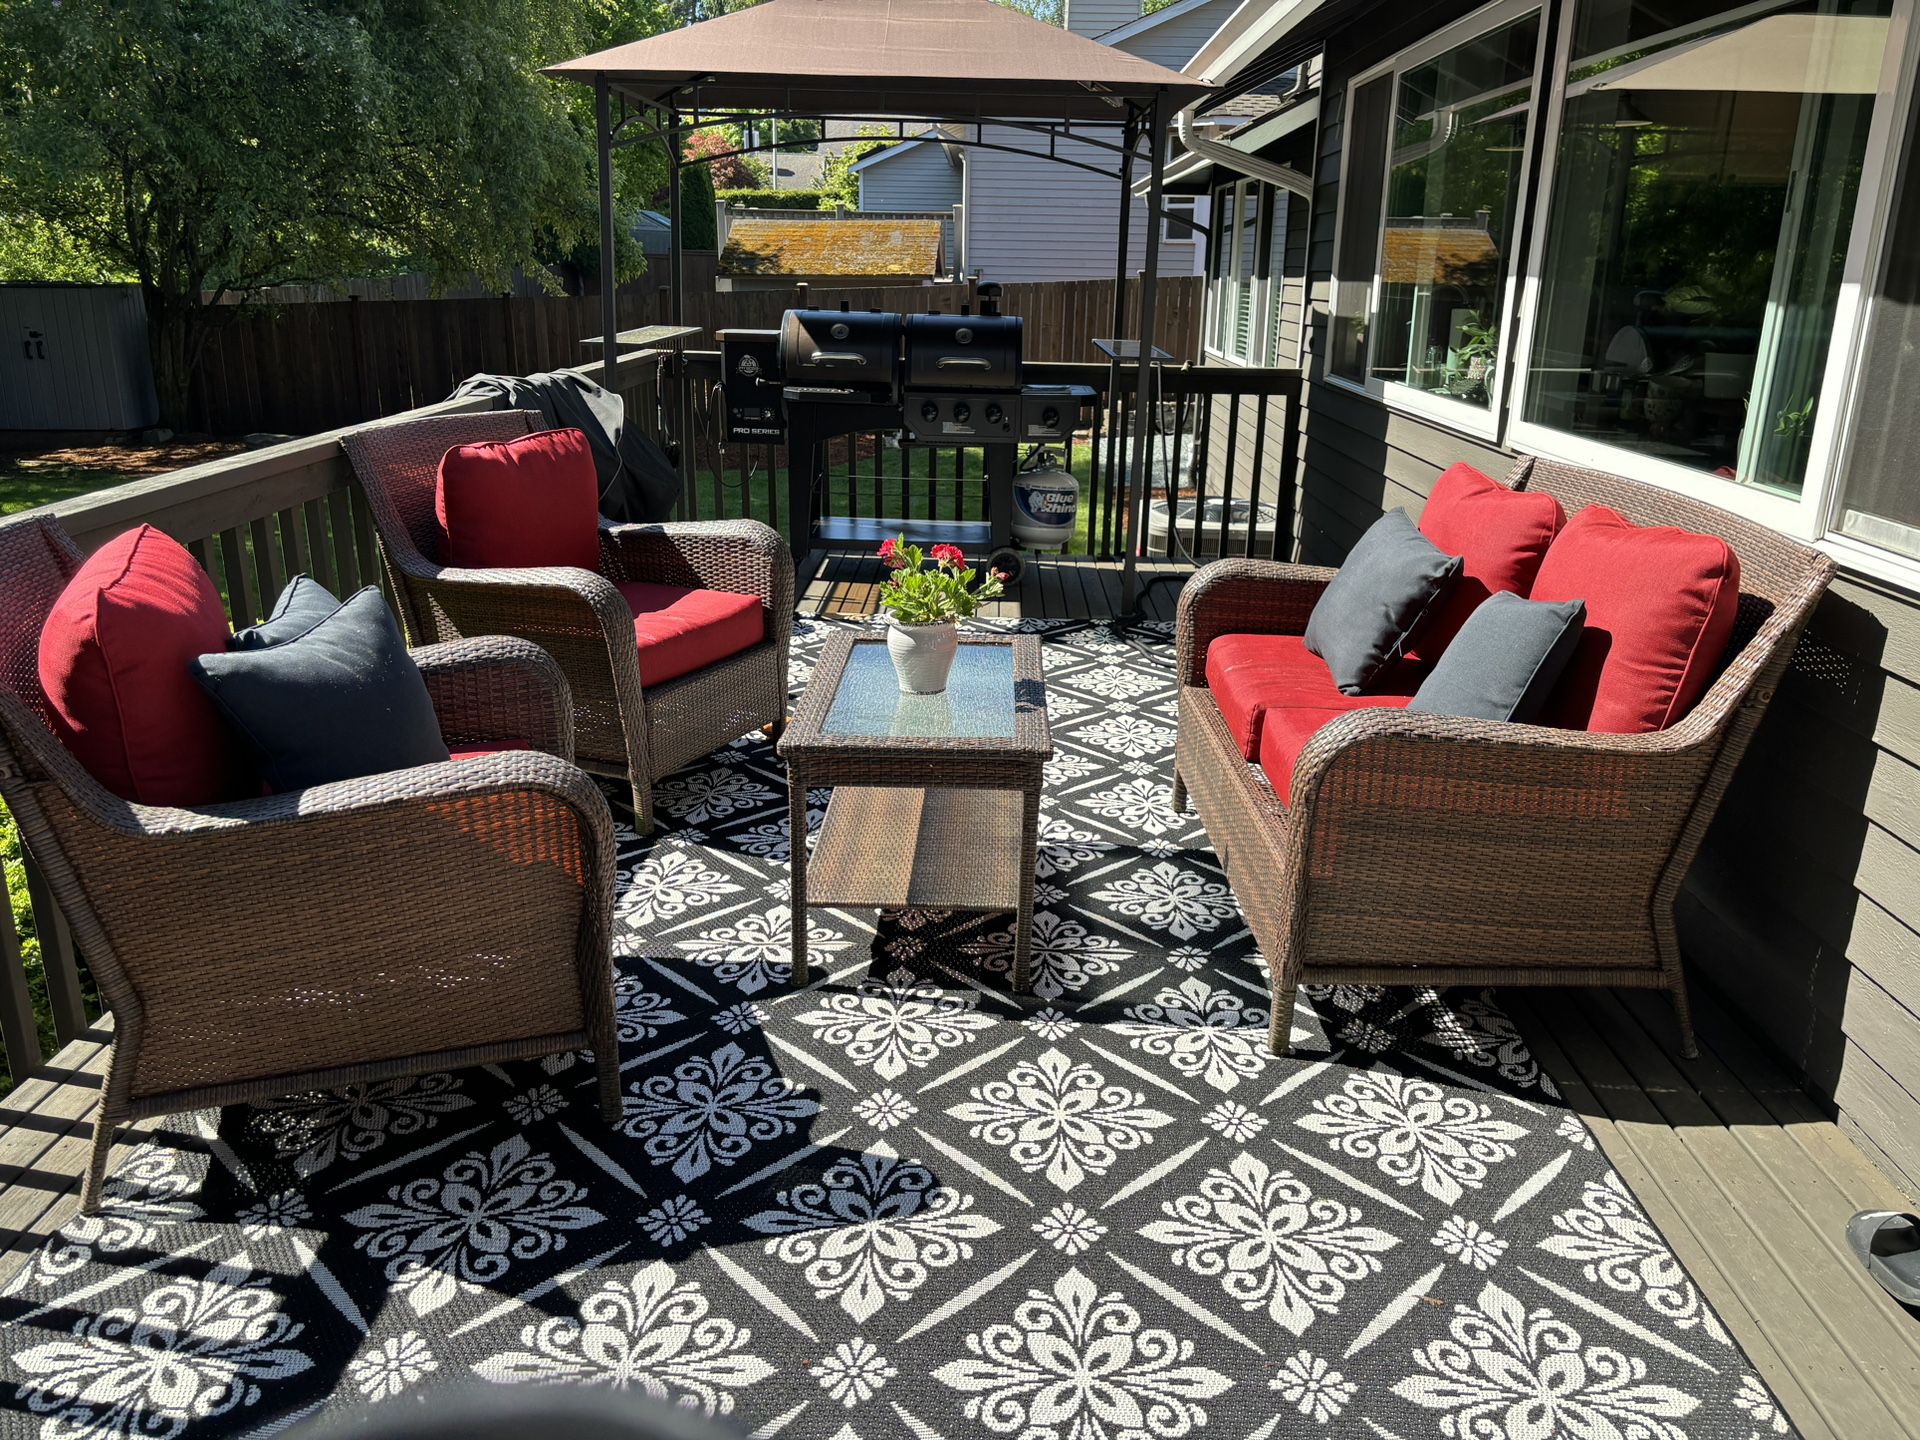 Outdoor Patio Carpets (two From Costco)